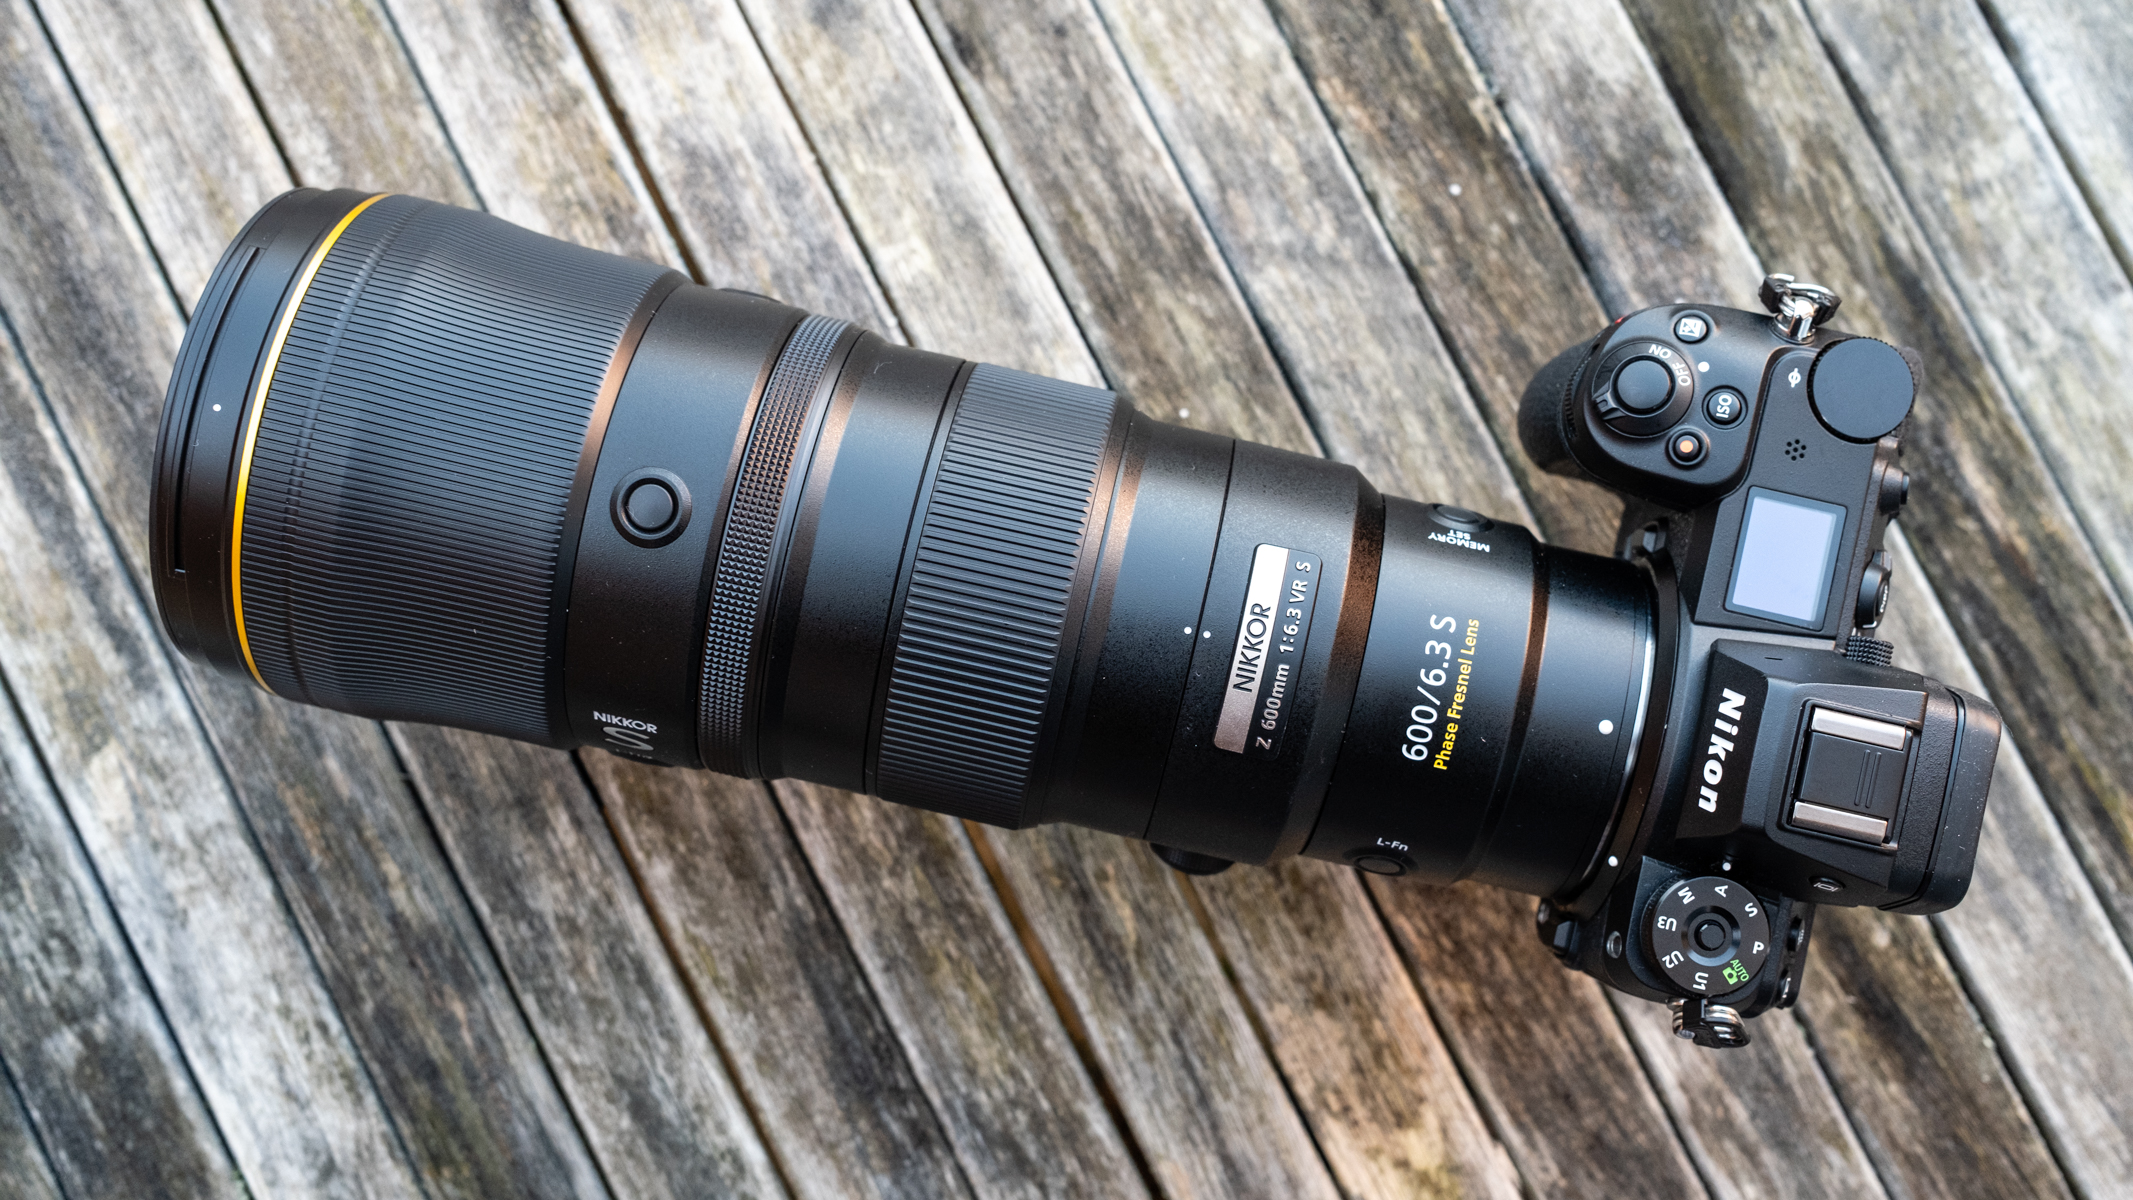 Nikkor Z 600mm f/6.3 VR S  attached to a Nikon Z 7II on a frosty wooden table